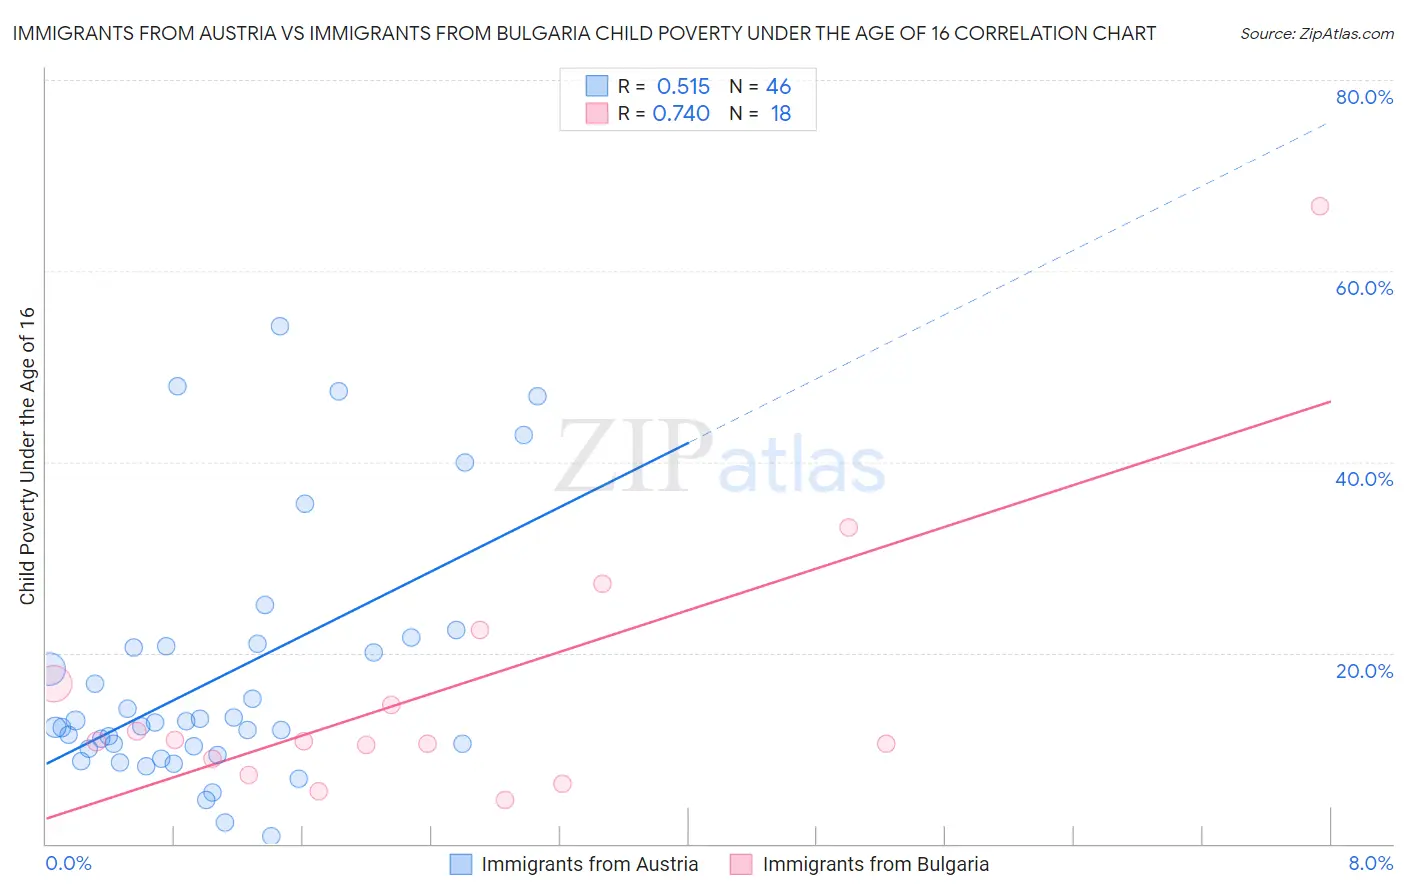 Immigrants from Austria vs Immigrants from Bulgaria Child Poverty Under the Age of 16